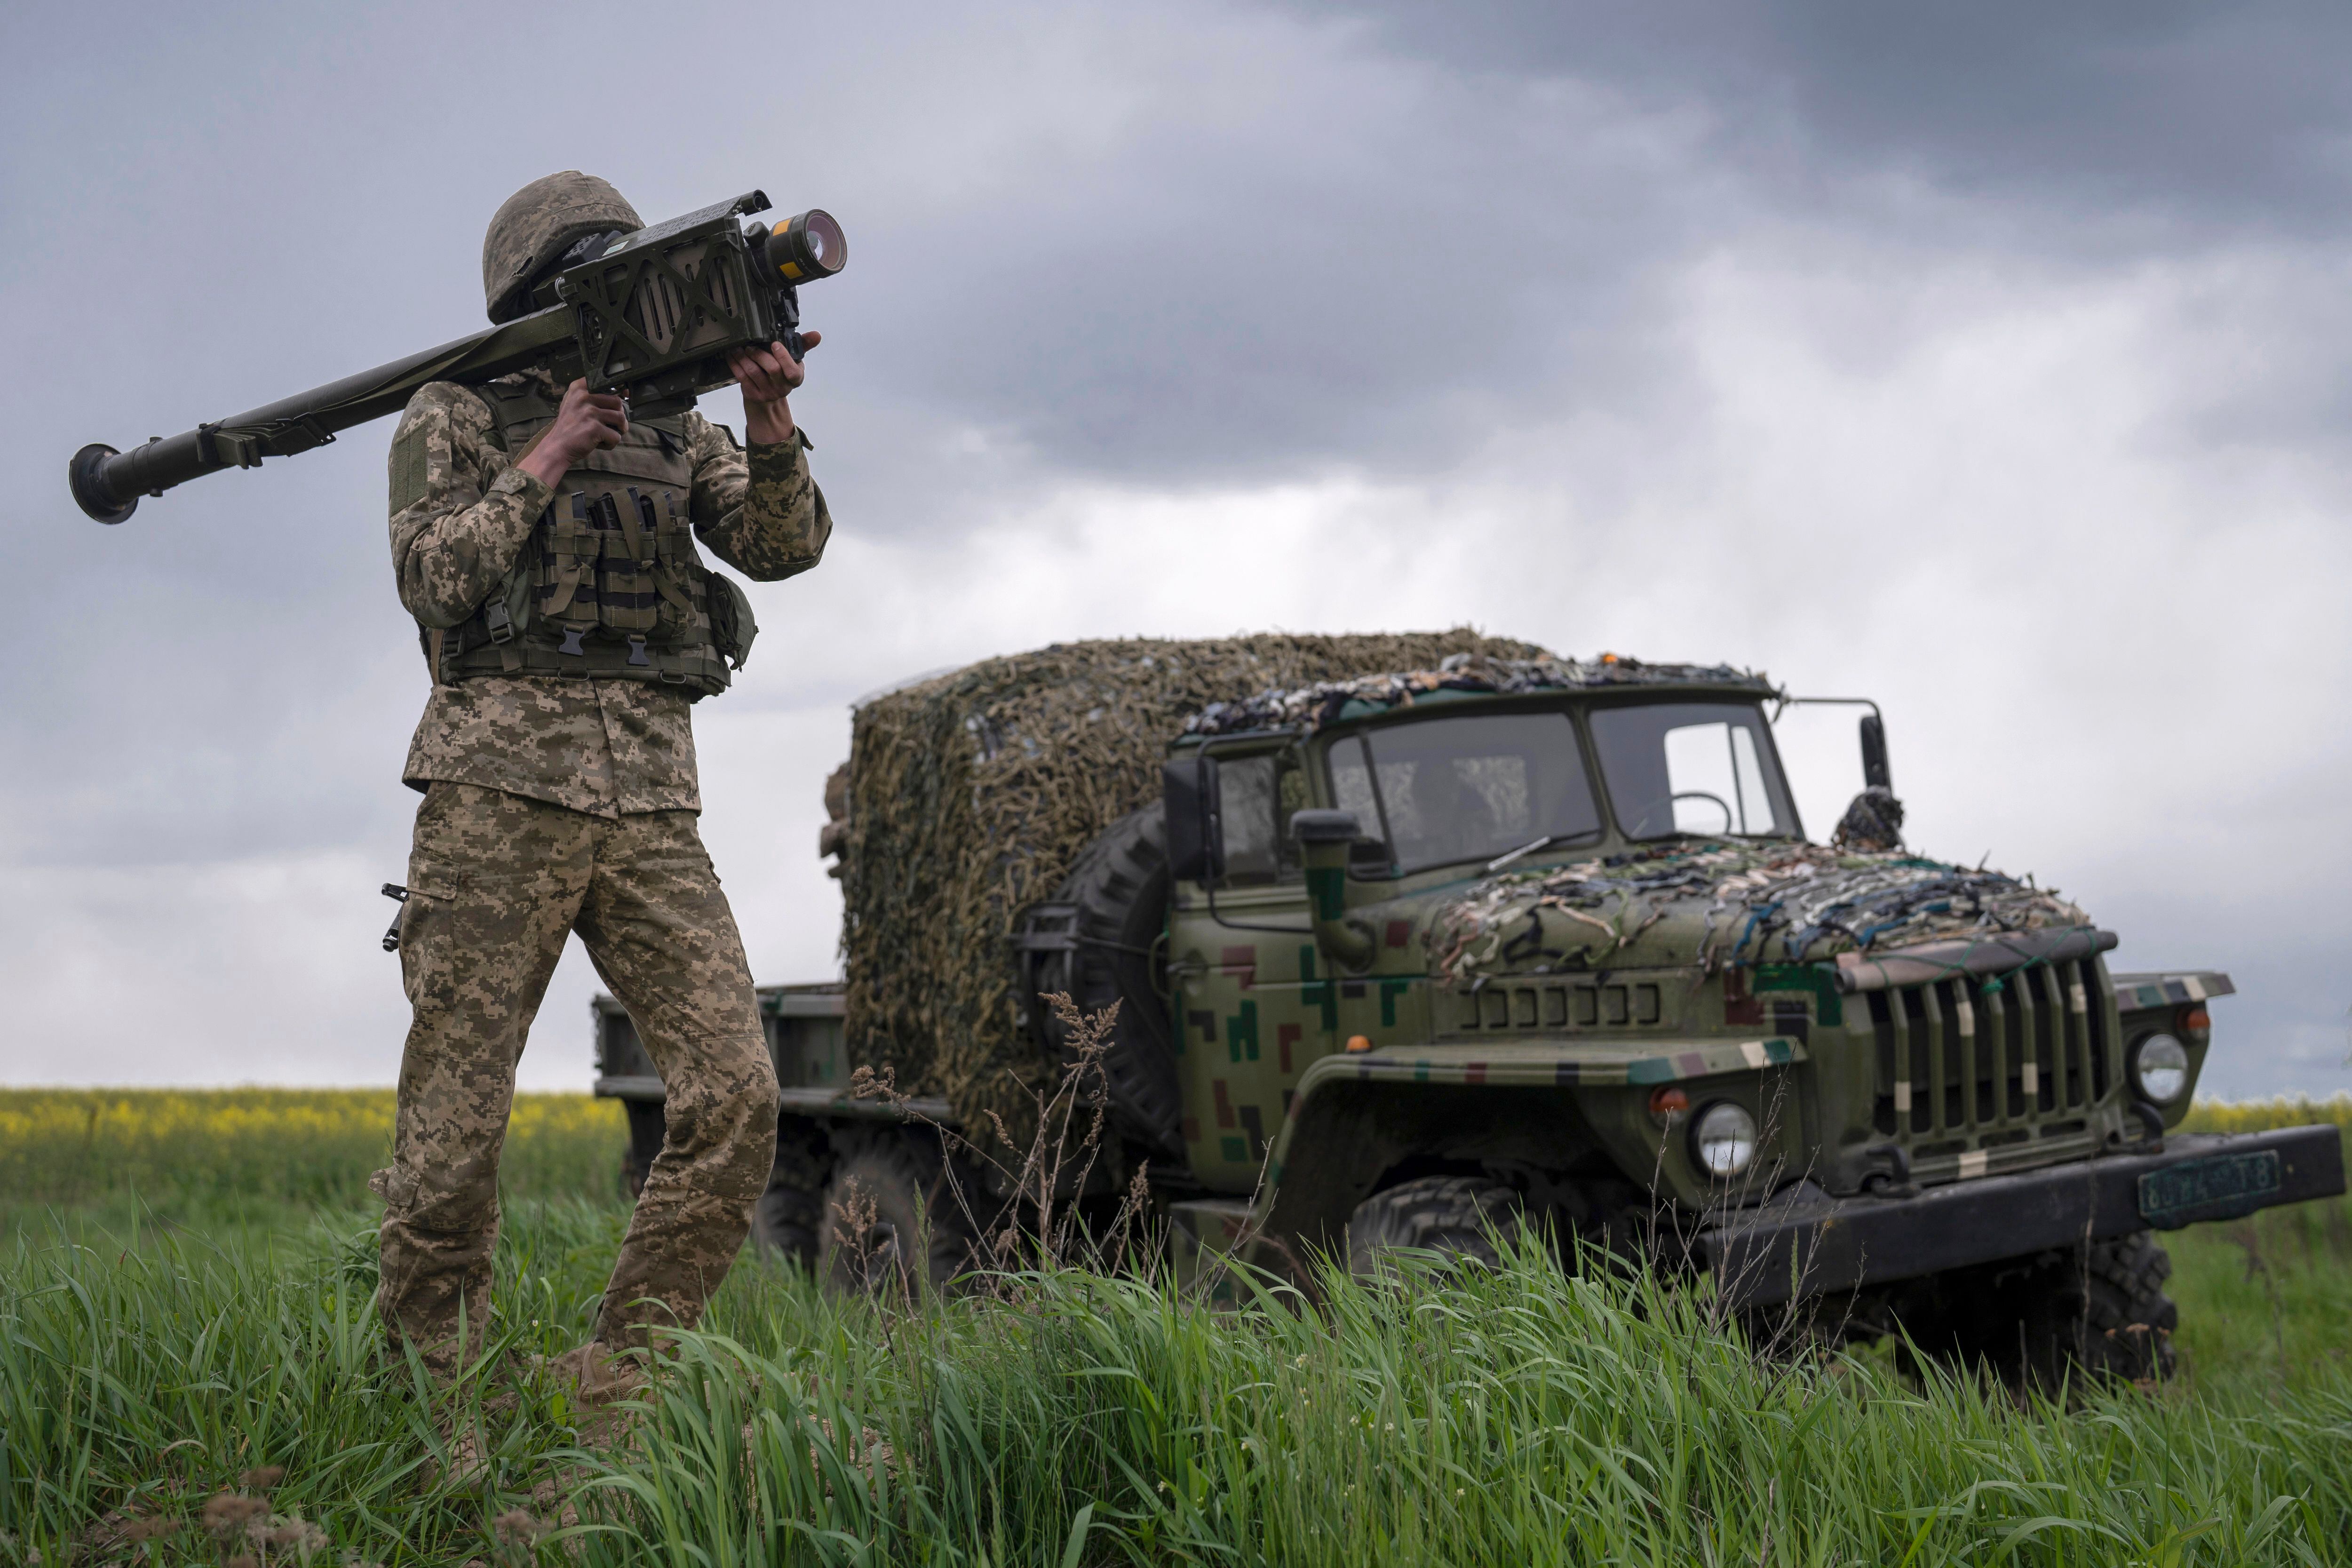 Members of a Ukrainian air-defense unit demonstrate their work near Kyiv on Monday, May 8, 2023. From camouflaged positions, the units dart out by truck into the farm fields around the capital, ready to take down enemy drones or missiles. Since Russia resumed regular air attacks on April 28, the units have a perfect score, intercepting every drone and missile shot at the capital. (AP Photo/Andrew Kravchenko)